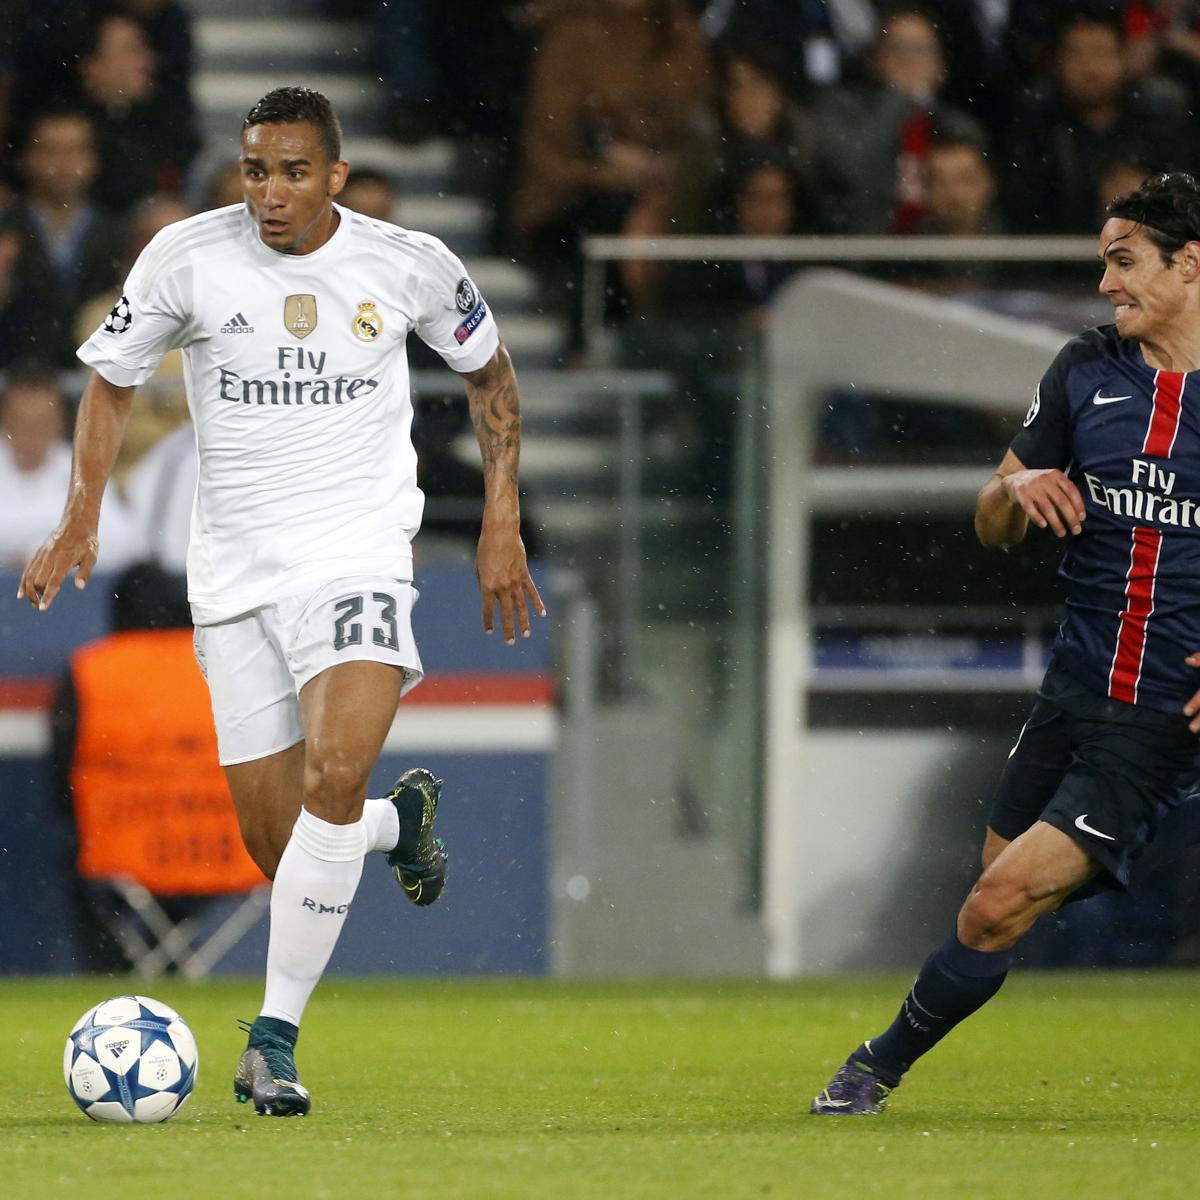 Real Madrid vs. PSG: Live Score, Highlights from Champions League | Bleacher Report ...